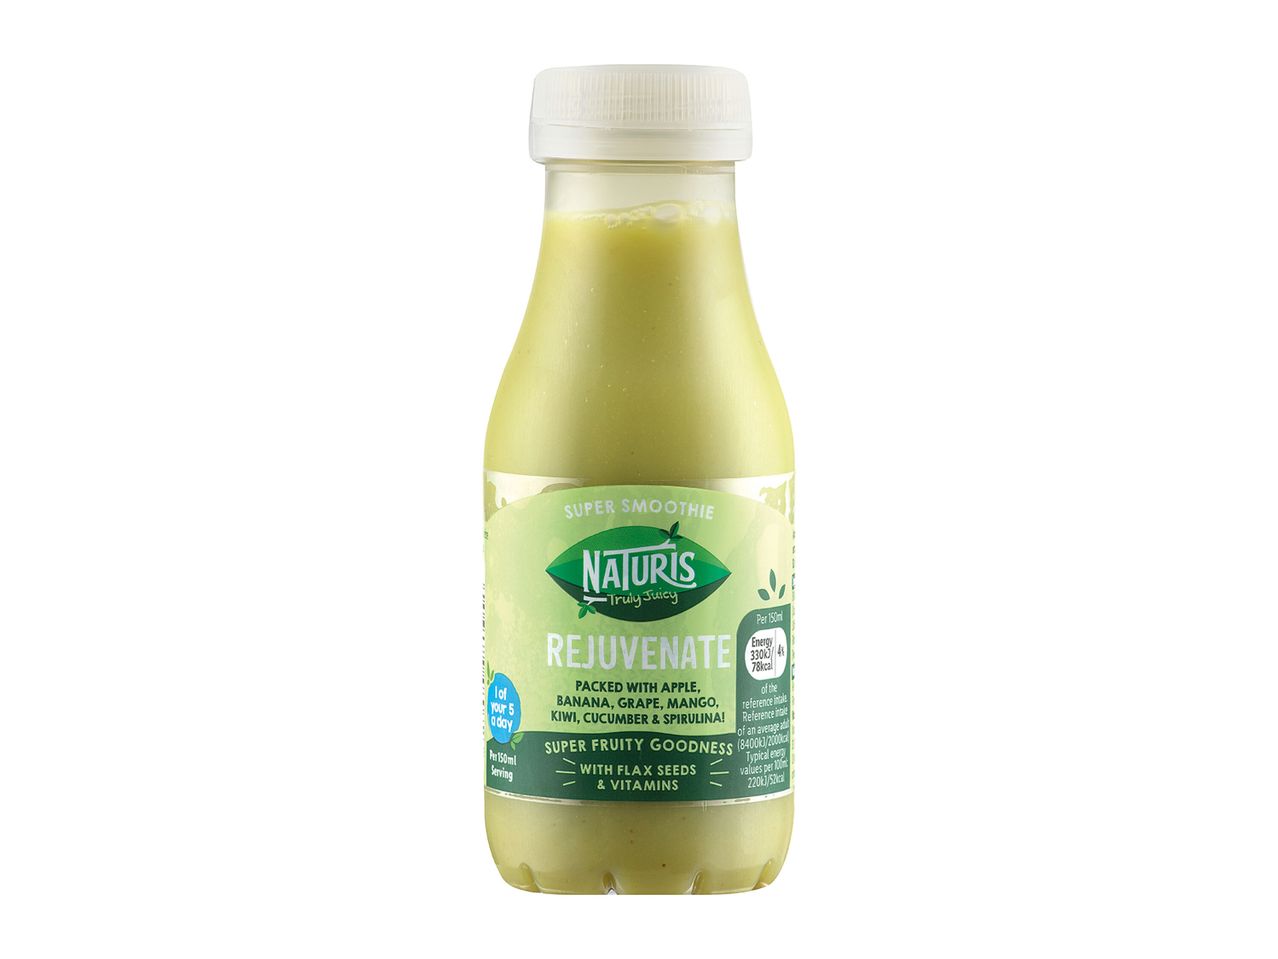 Go to full screen view: Naturis Super Smoothie Assorted Flavours 250ml Bottle - Image 1